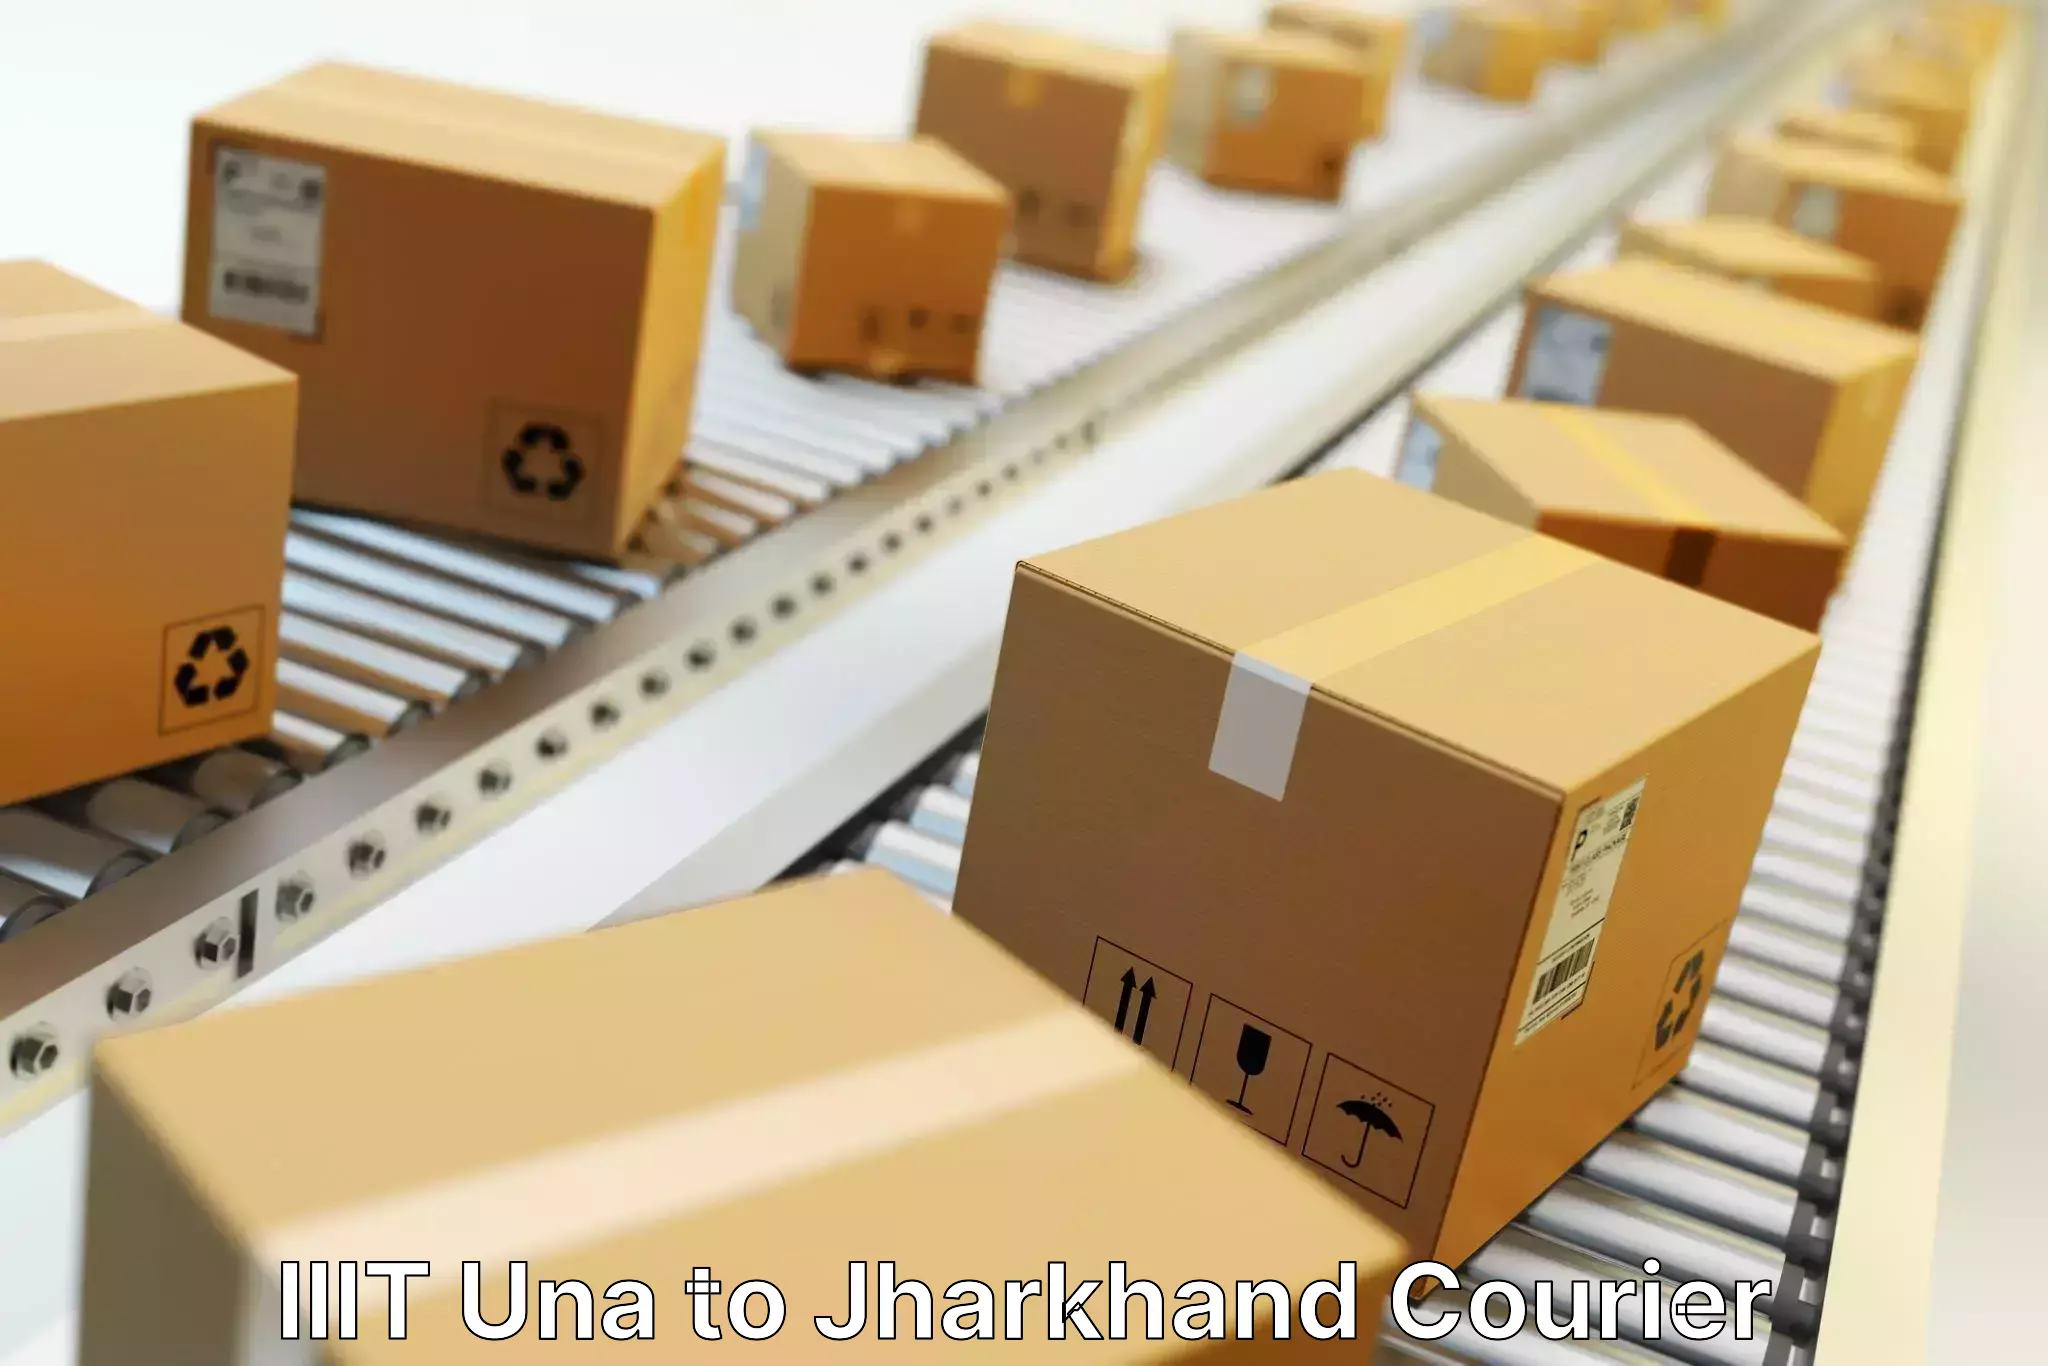 Retail shipping solutions IIIT Una to Jharkhand